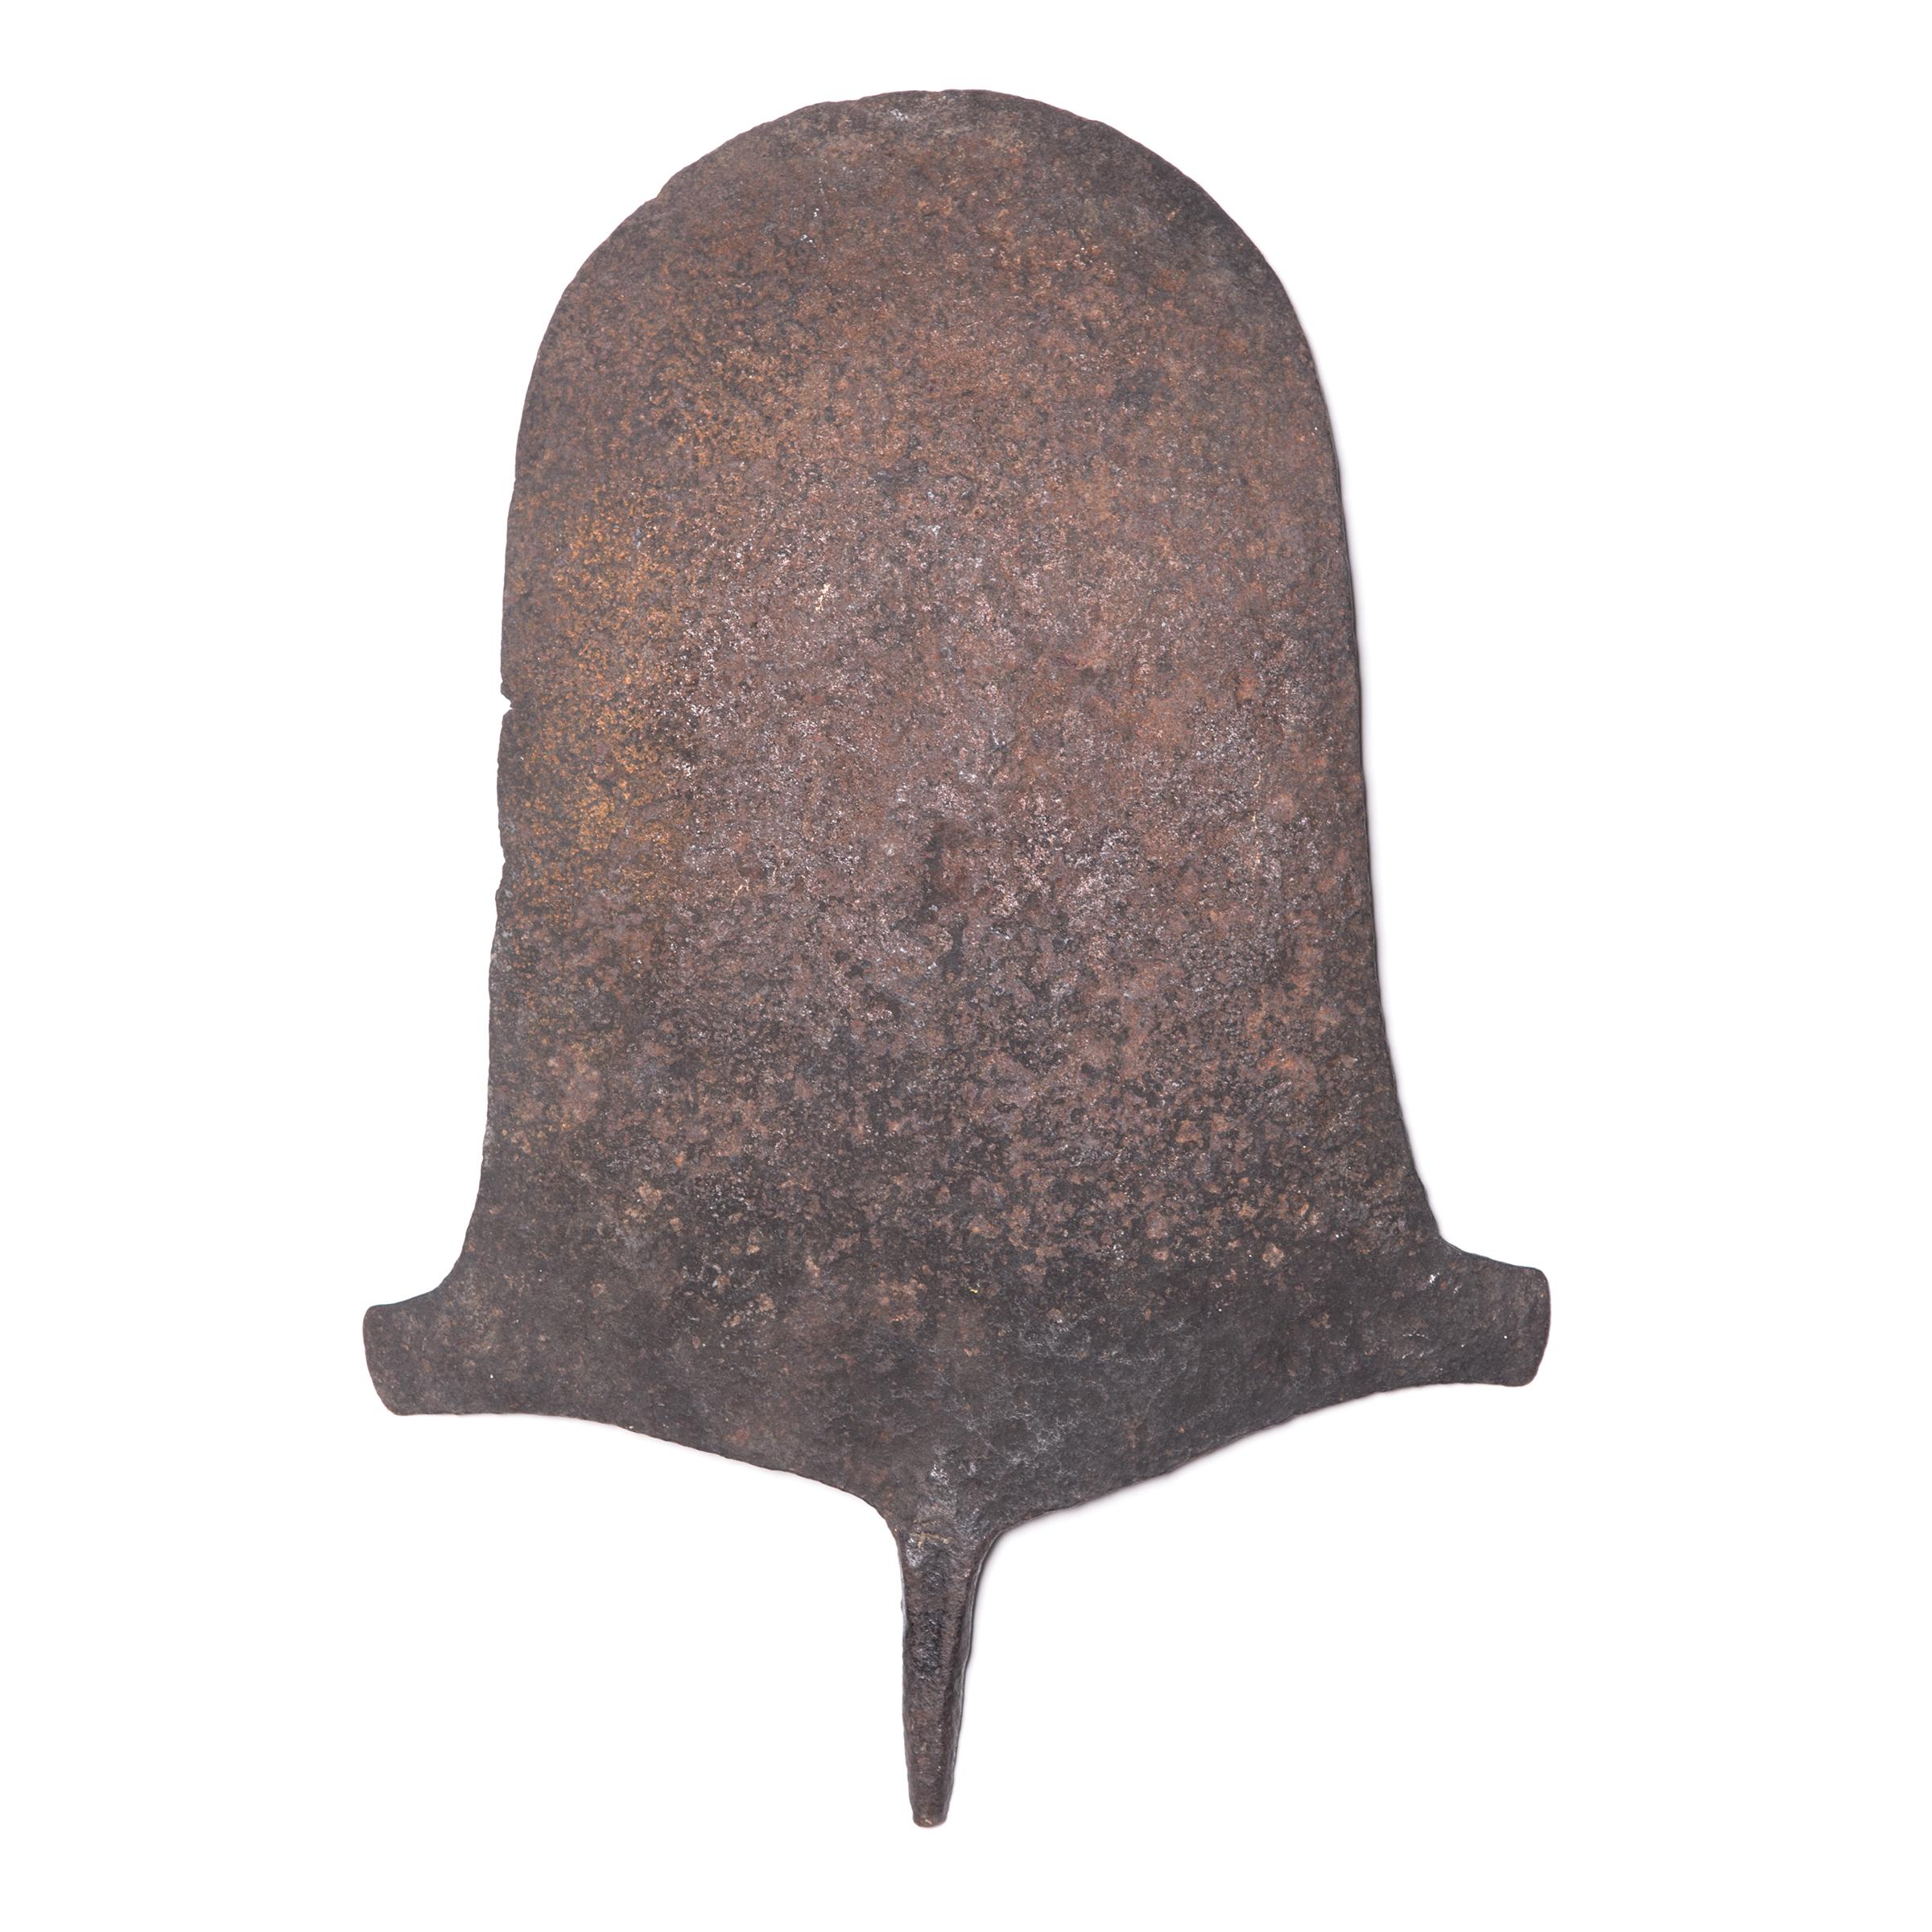 In many pre-colonial regions of Africa, iron was so valuable that tools often doubled as currencies for rare but significant transactions. This large iron form is a currency piece from the Afo peoples of northern Nigeria, and is modeled after the